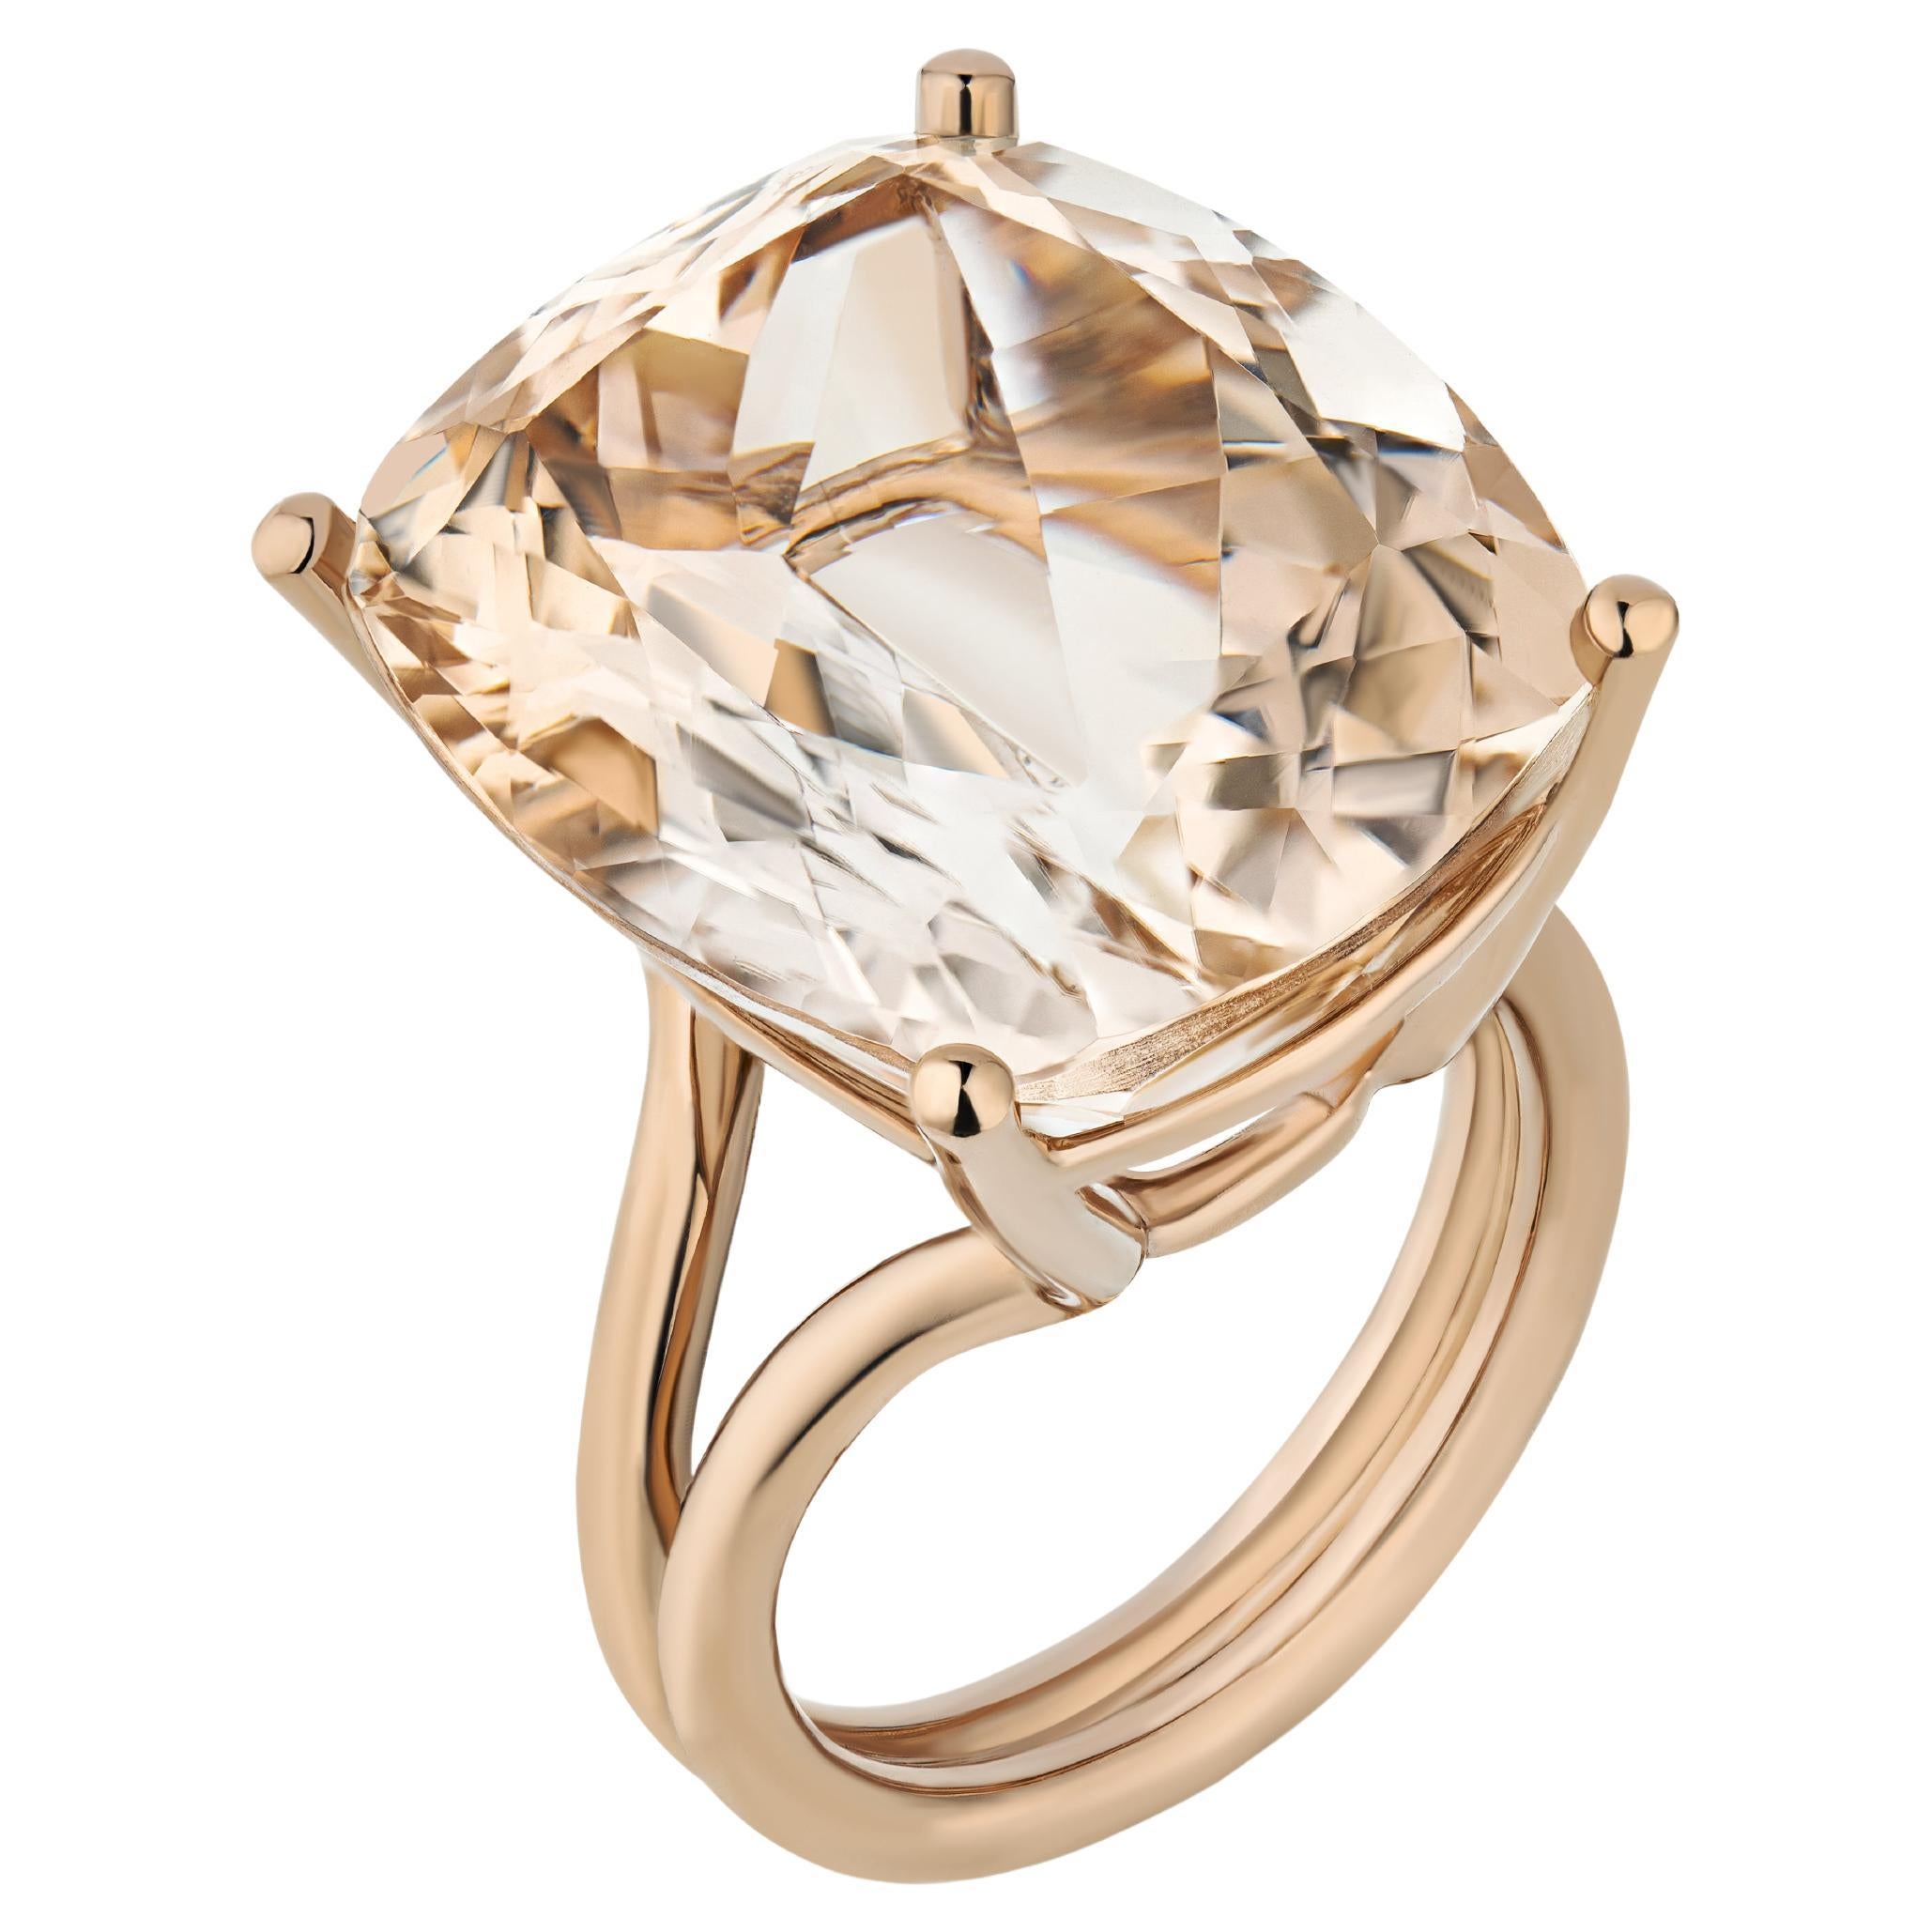 33.57 Carat Precious Topaz Gold Ring by Wagner Preziosen For Sale